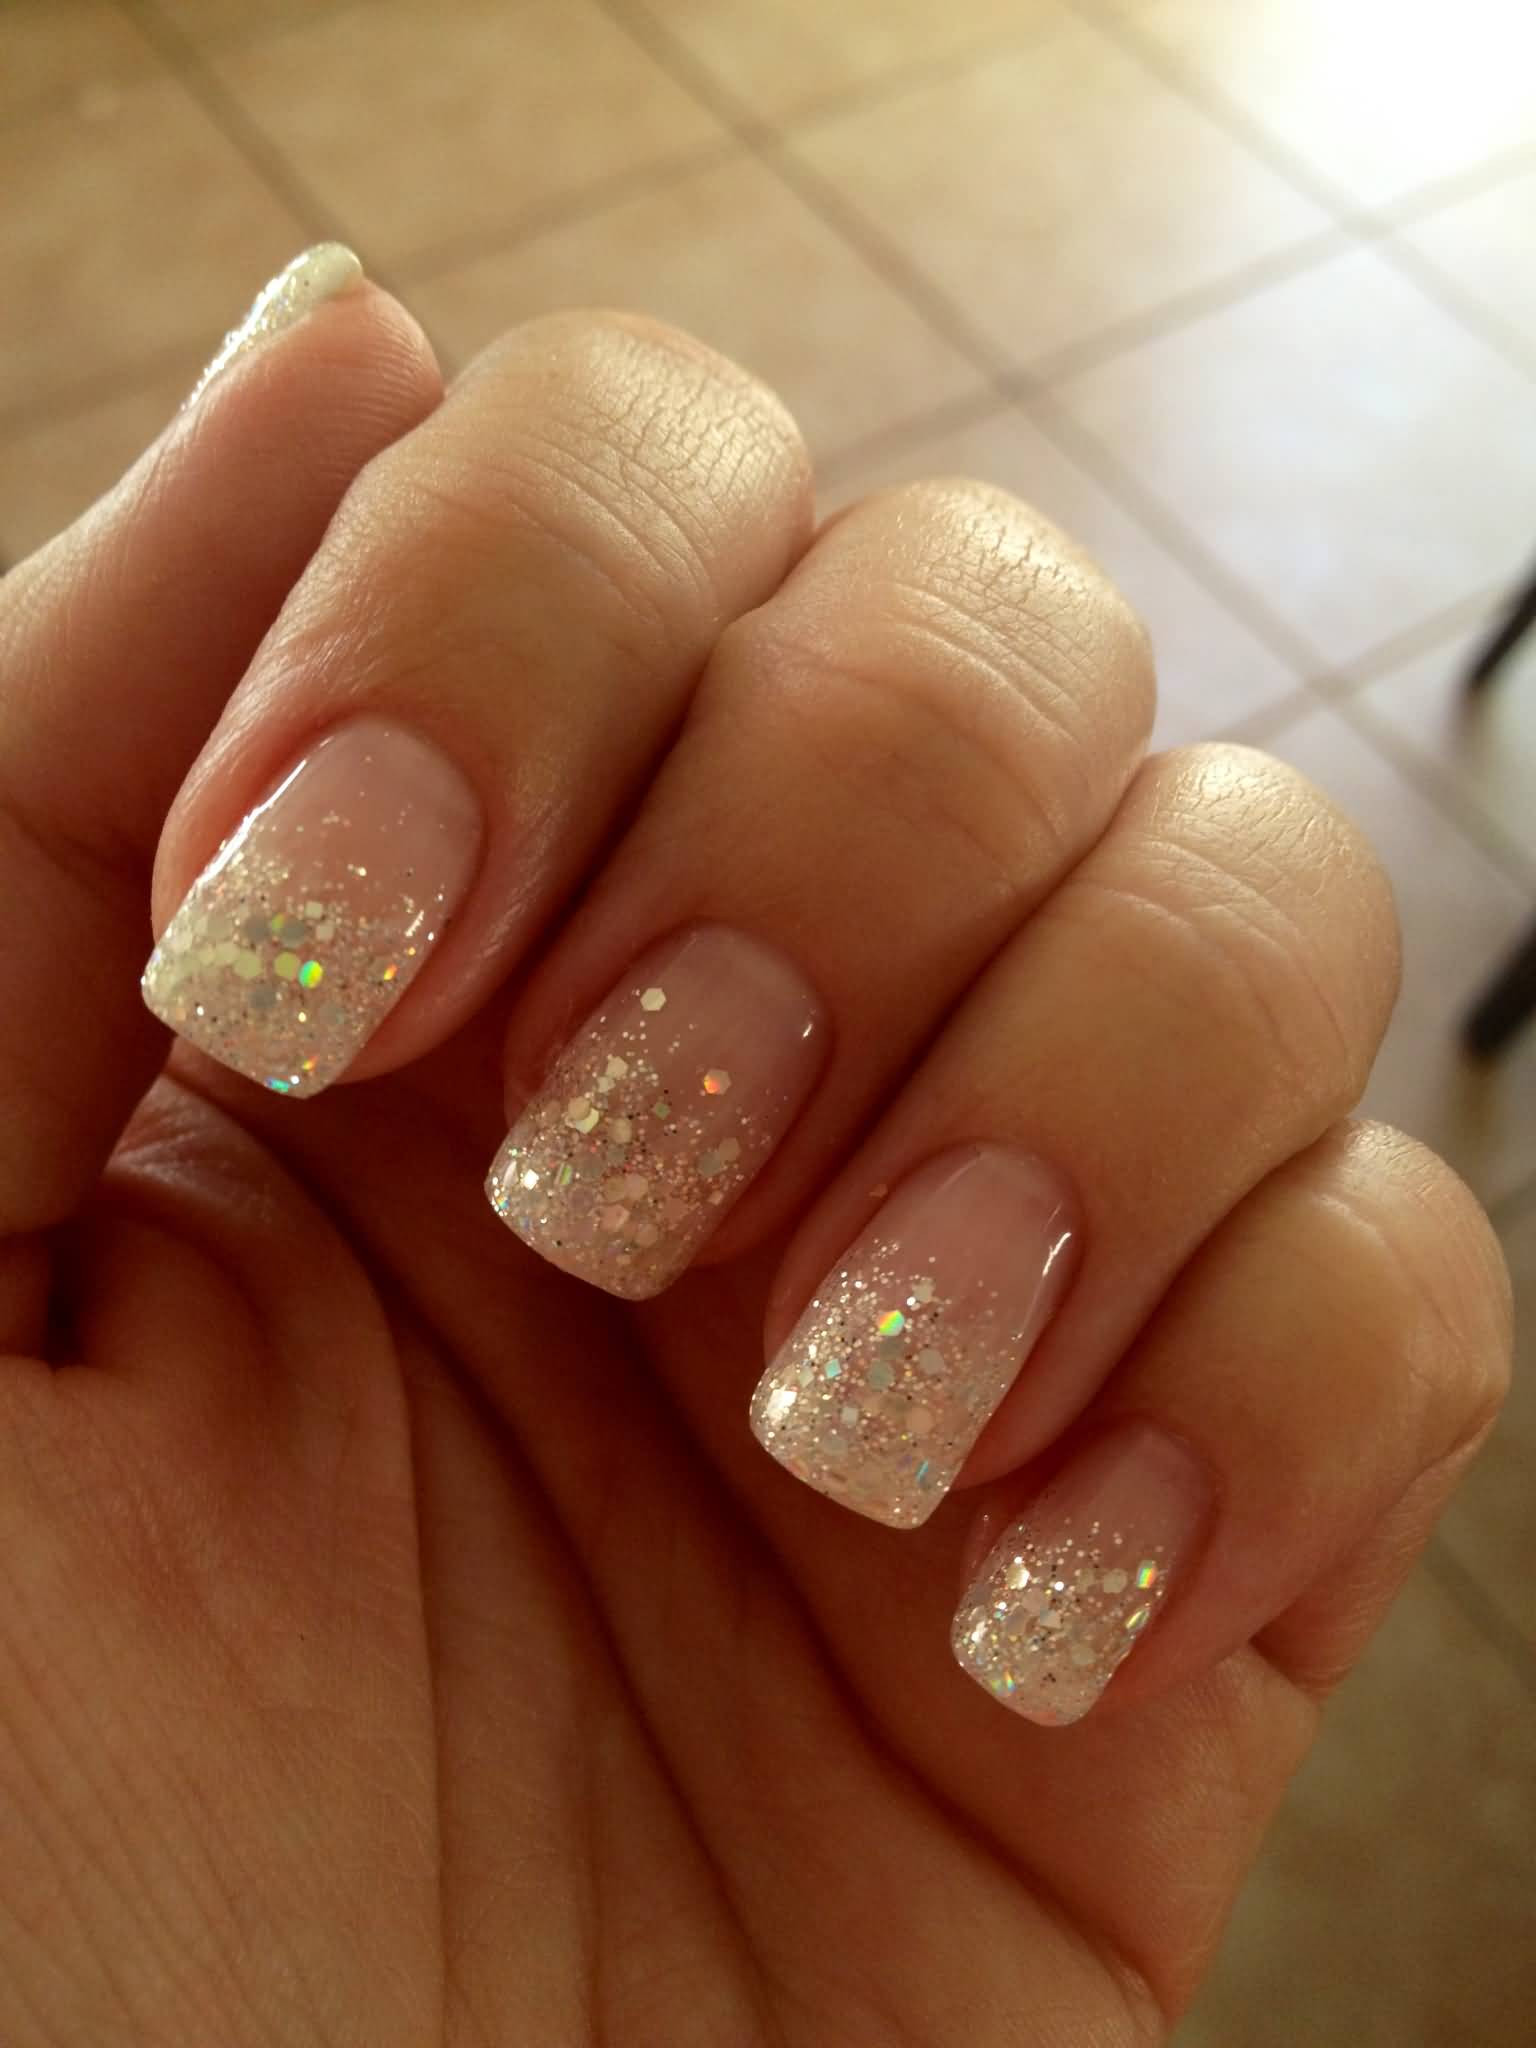 Glitter French Tip Acrylic Nails
 50 Most Beautiful Glitter French Tip Nail Art Design Ideas